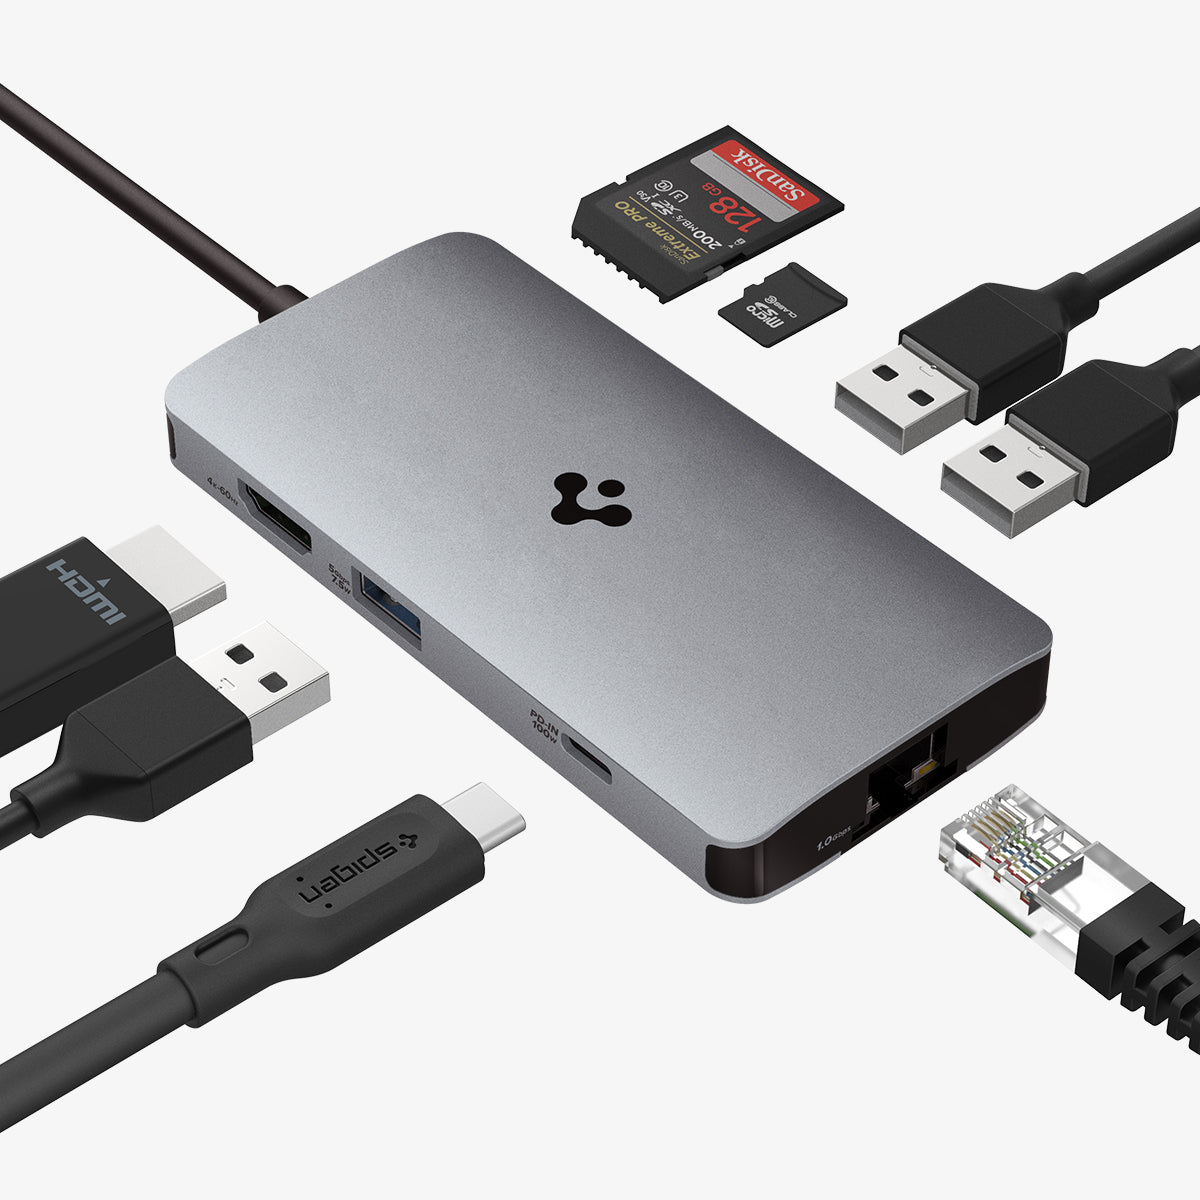 ACA06141 - ArcDock Multi Hub 8-in-1 PD2303 in Space Gray showing the top and sides with different types of USB, USB-C, Ethernet and SD cards hovering in front of input ports of a hub